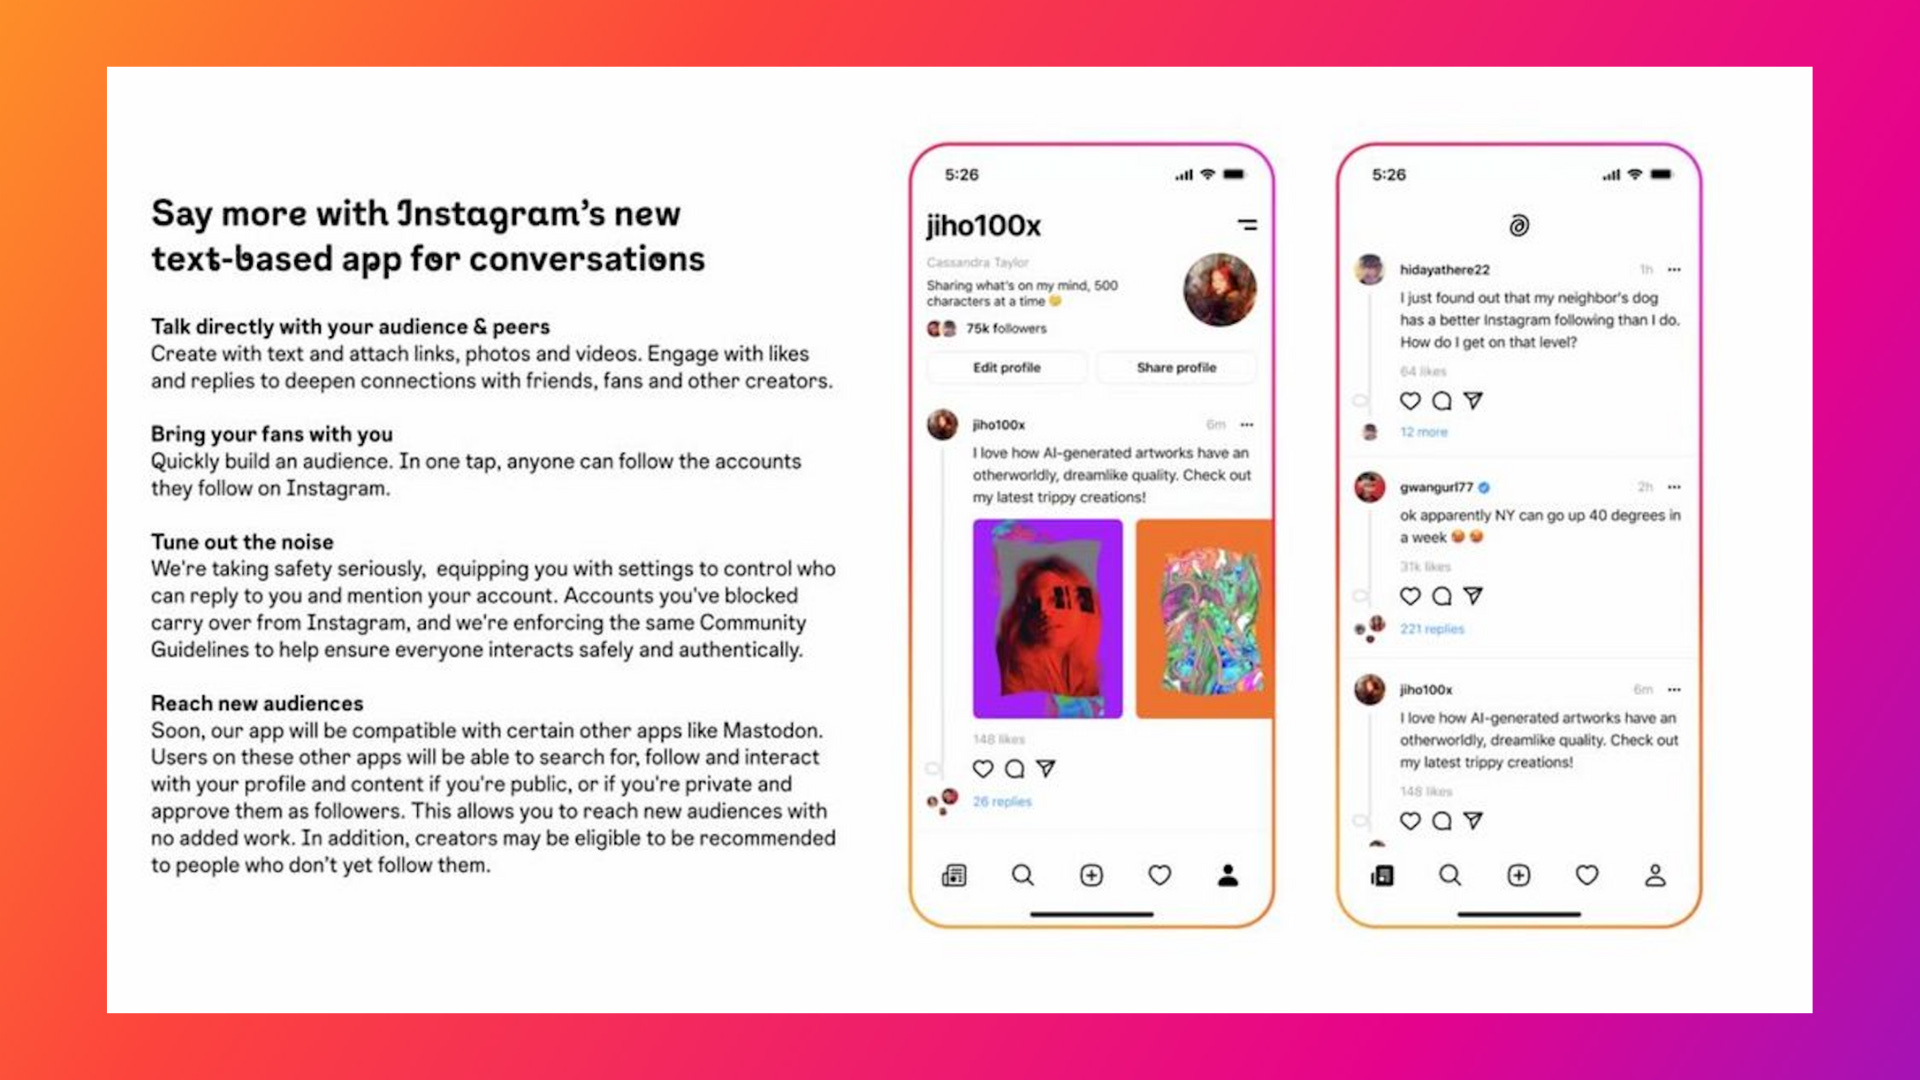 Meta’s Instagram is working on a text-based app to rival Twitter